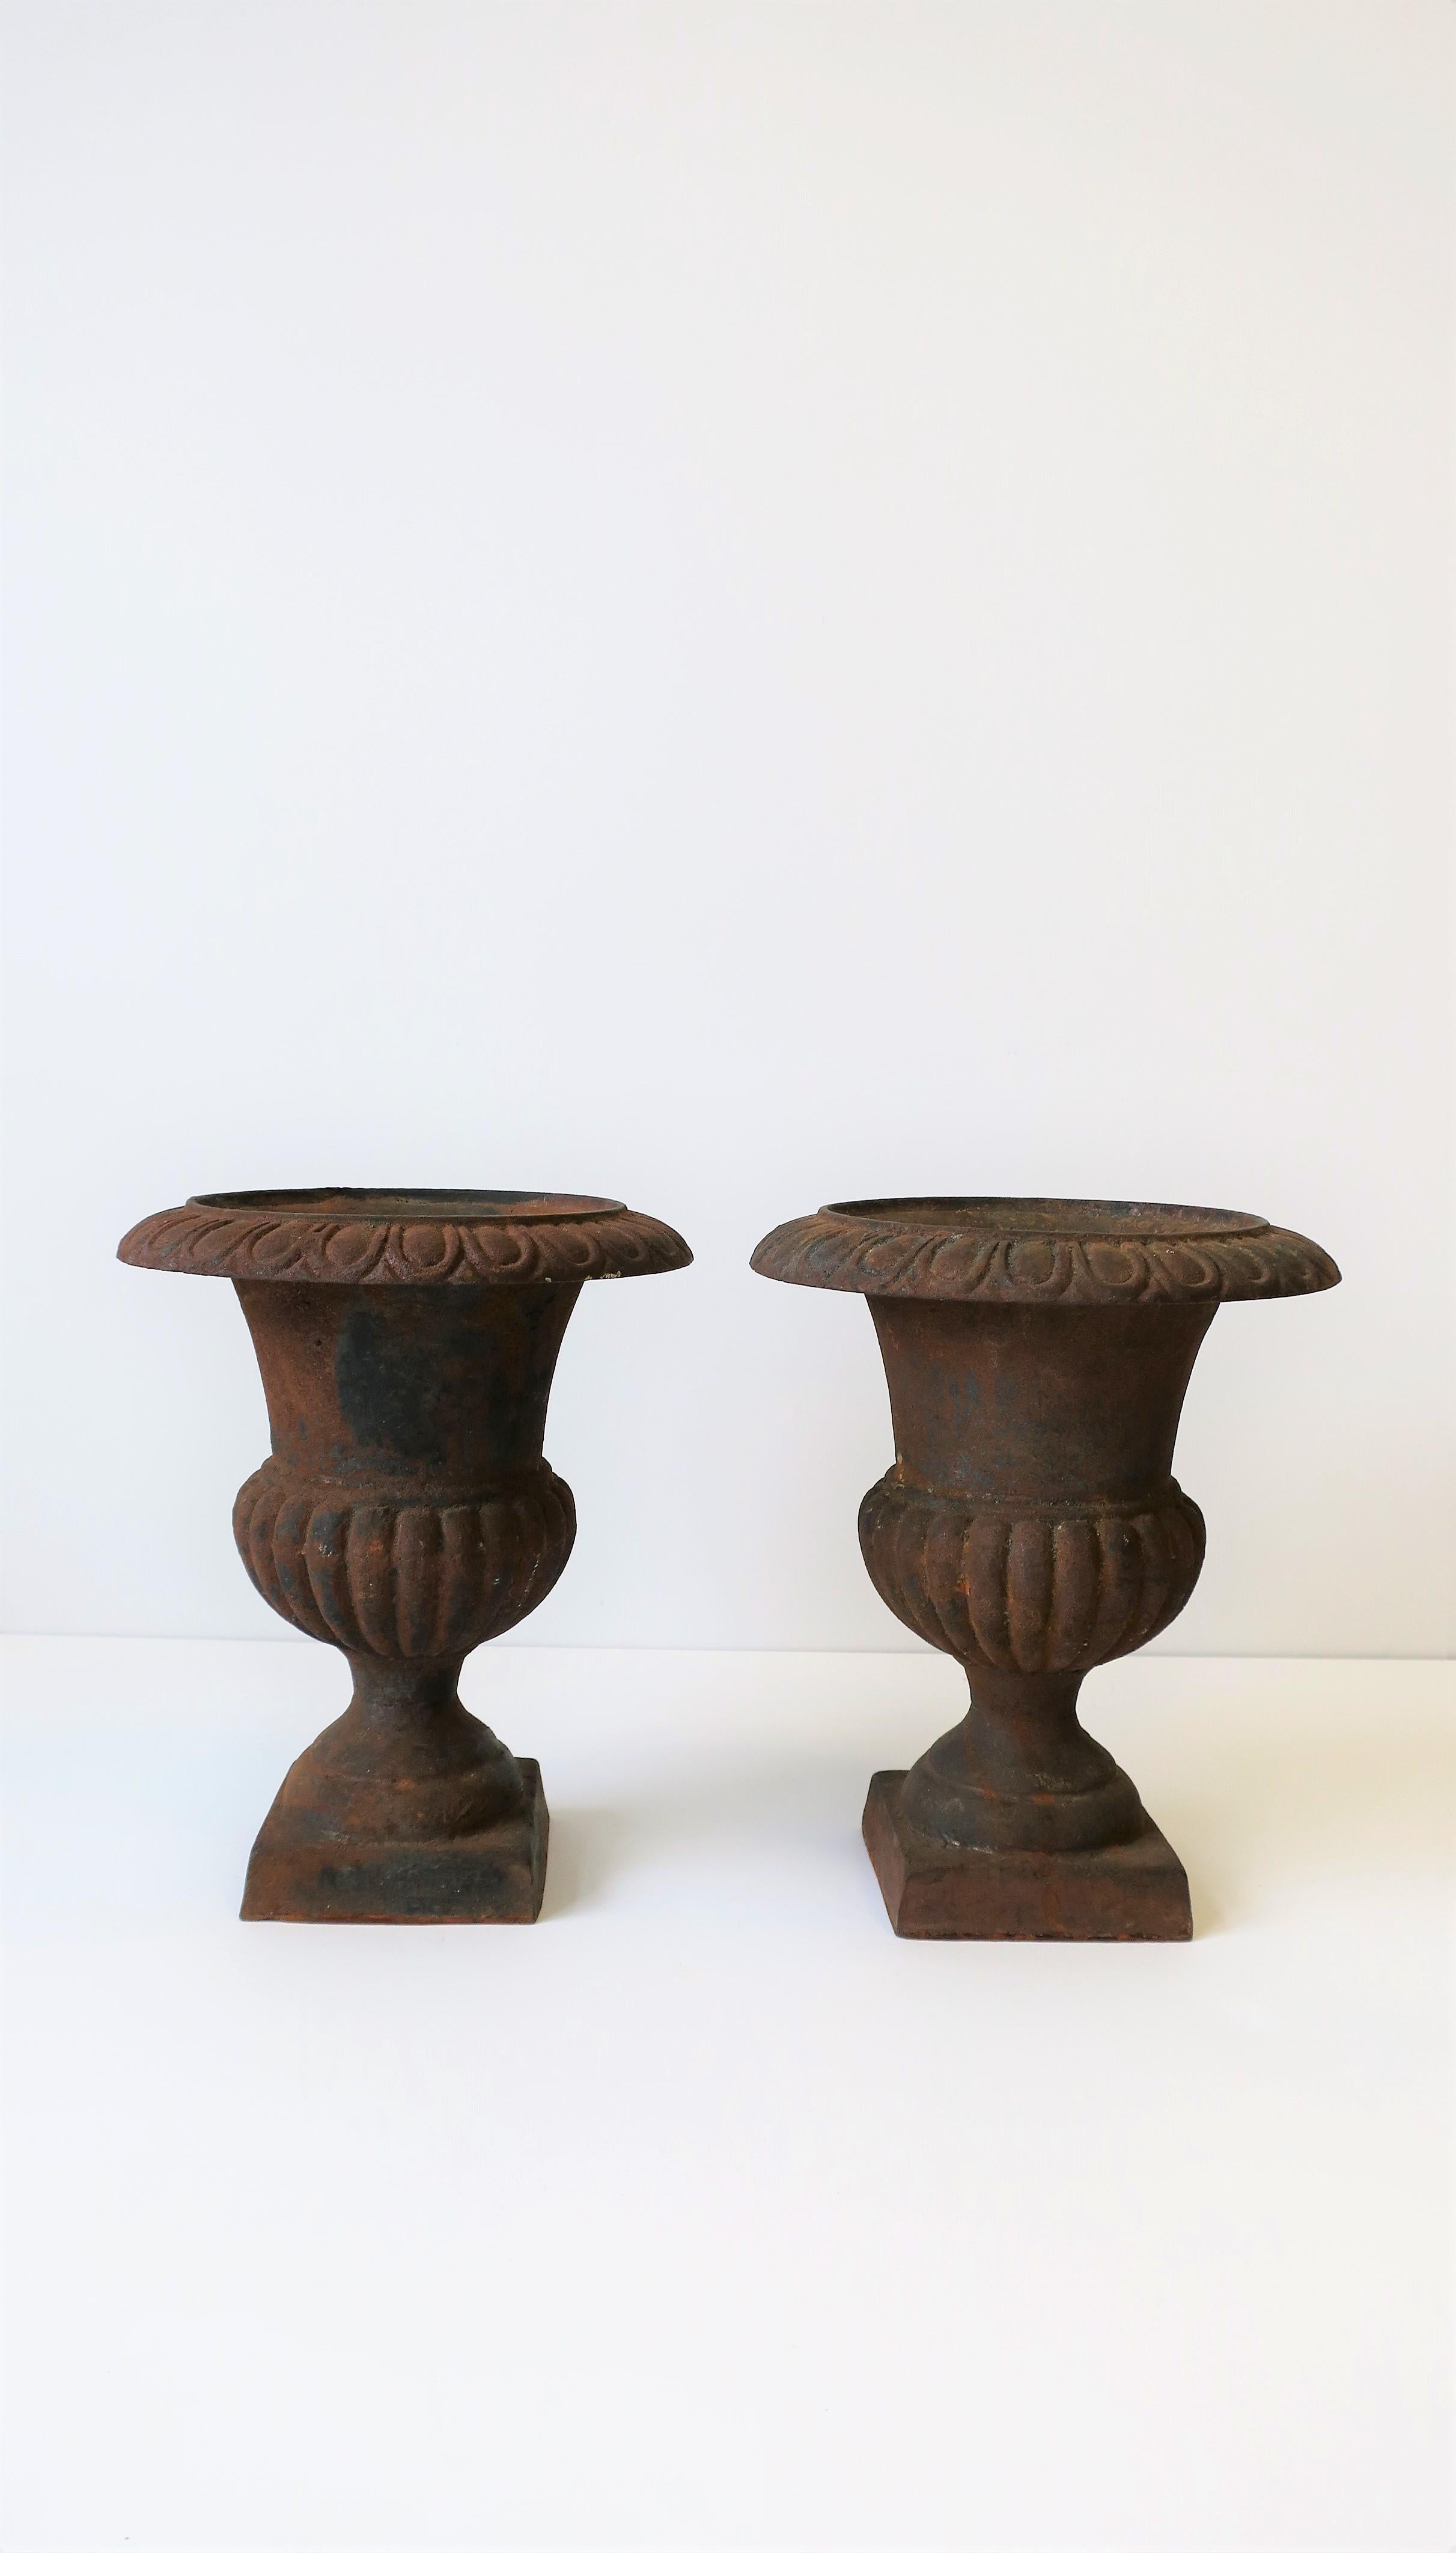 A beautiful pair of weathered iron urns plant or flowerpot cachepot jardinieres with square pedestal bases in the Neoclassical style, circa 20th century, maybe Europe/France. Substantial in weight, use indoors or outdoors garden, patio, etc. Pair